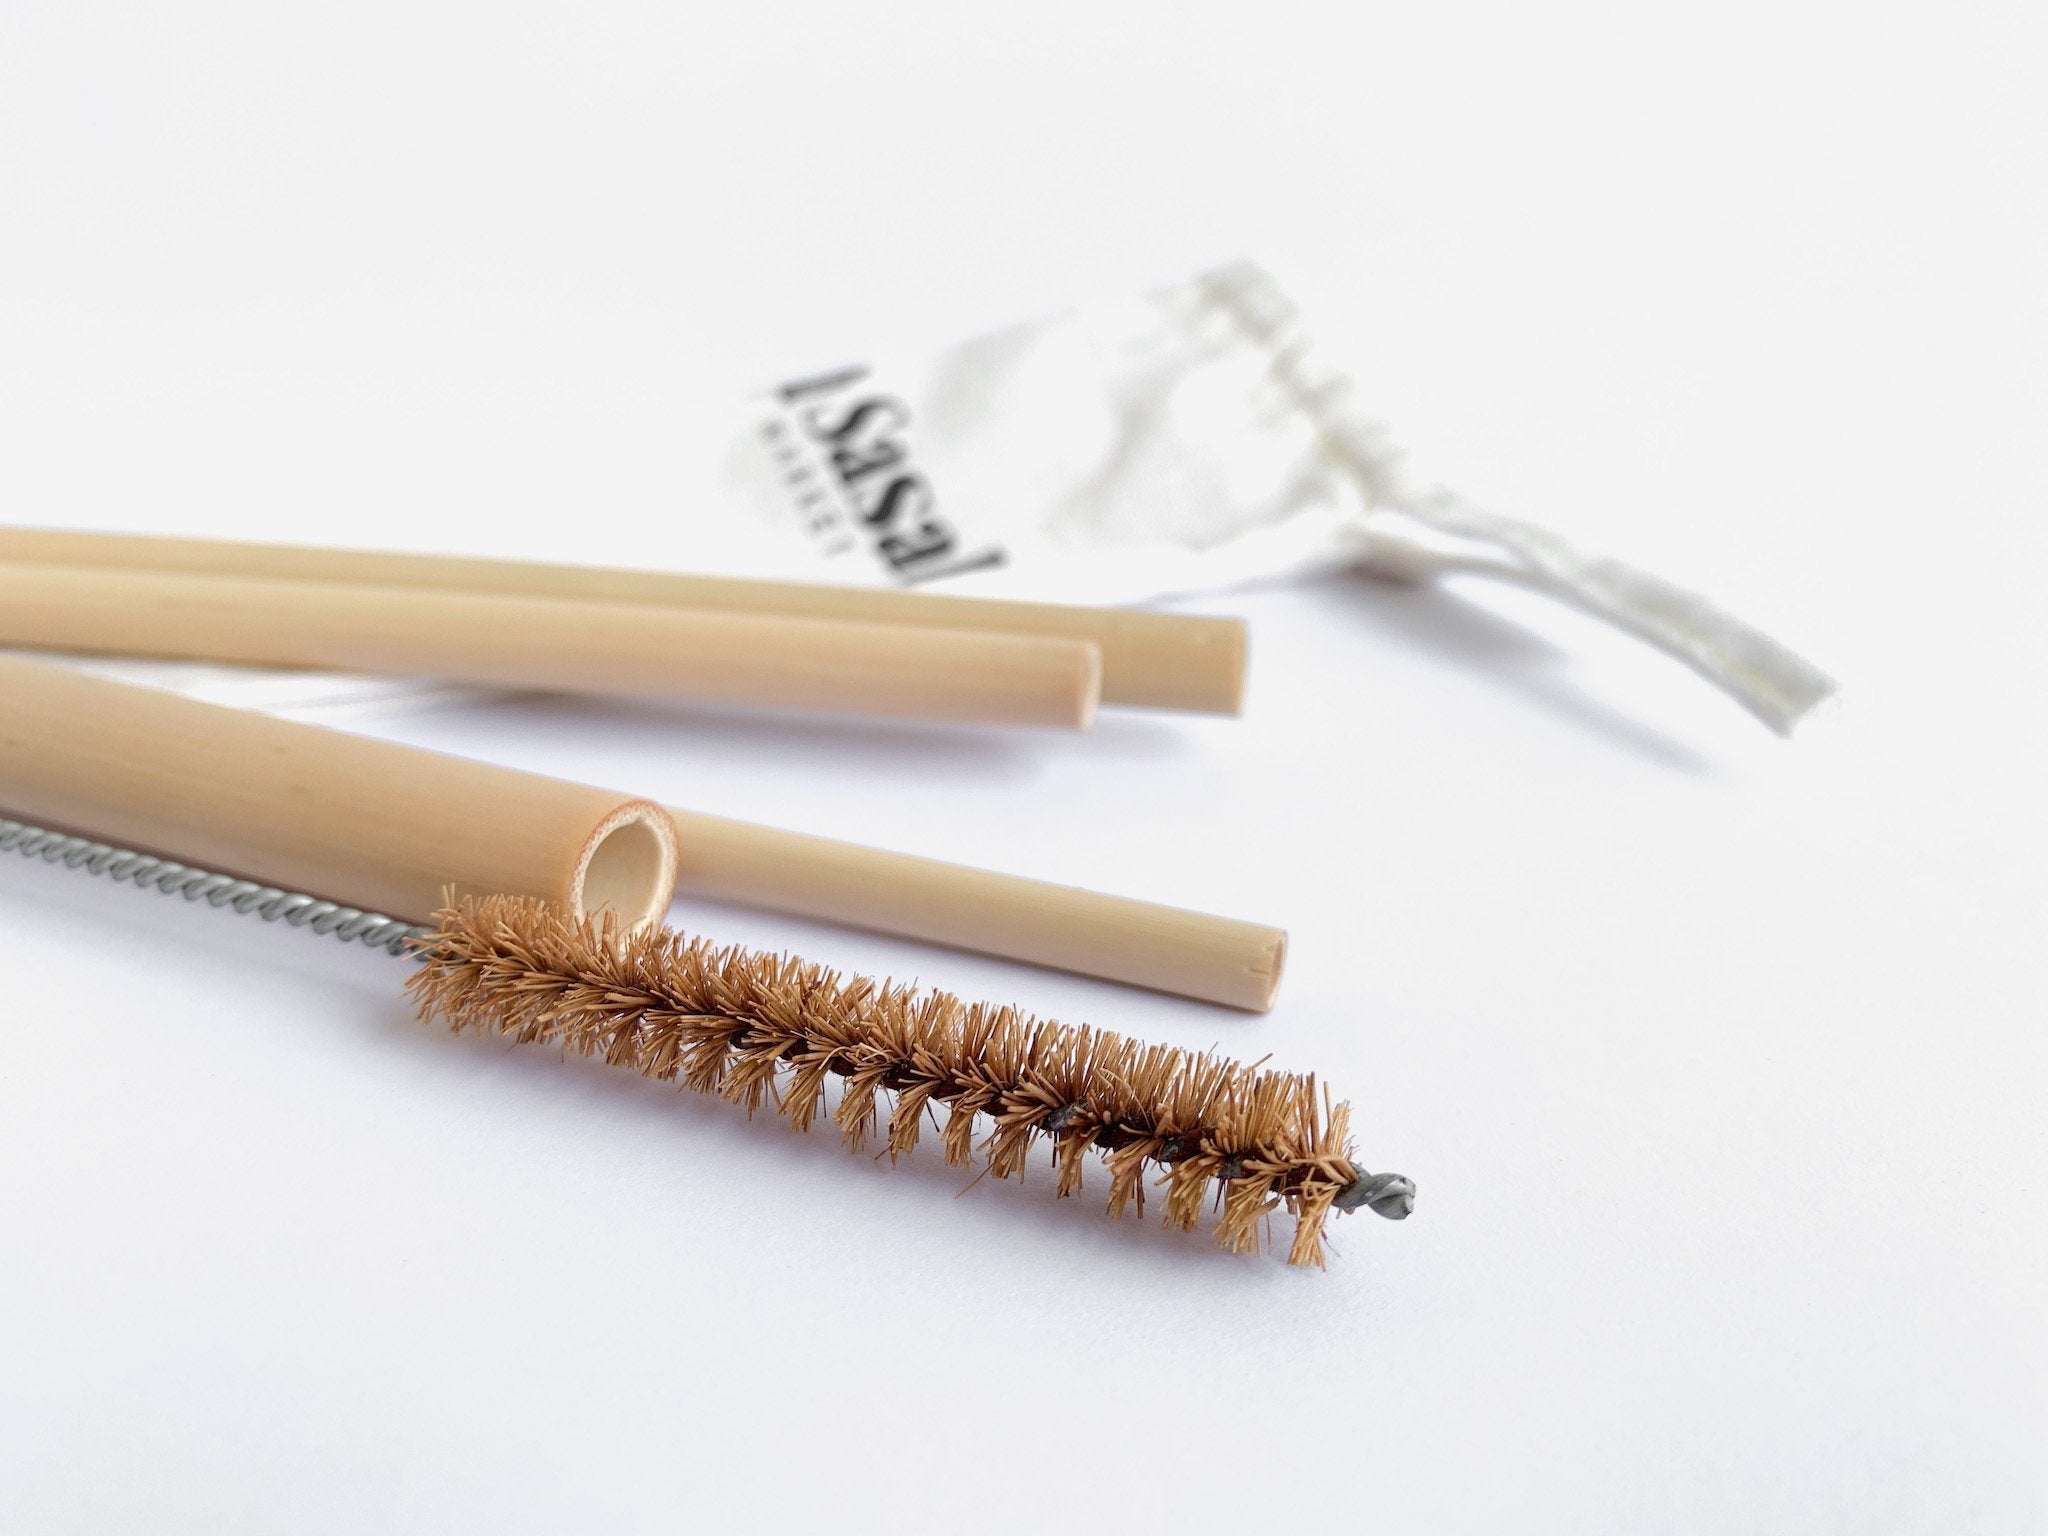 Bamboo Straws, of 4 with a Cleaner Set